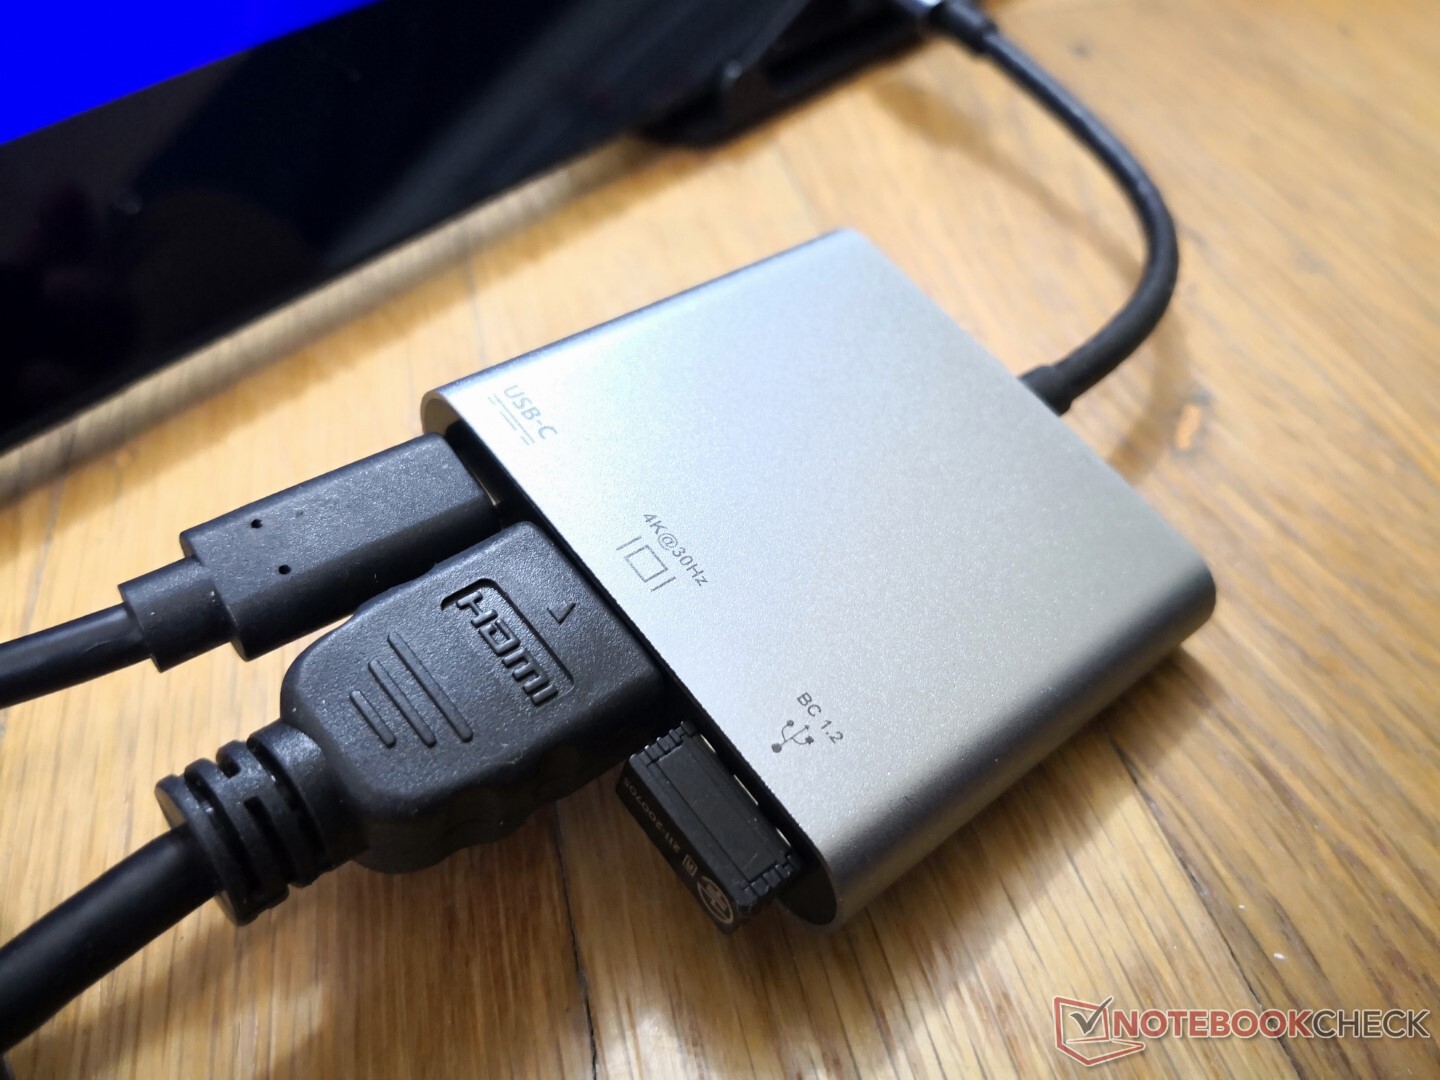 Anker 535 USB C Hub (5-in-1, for iMac), with 2 USB-A 10 Gbps Data